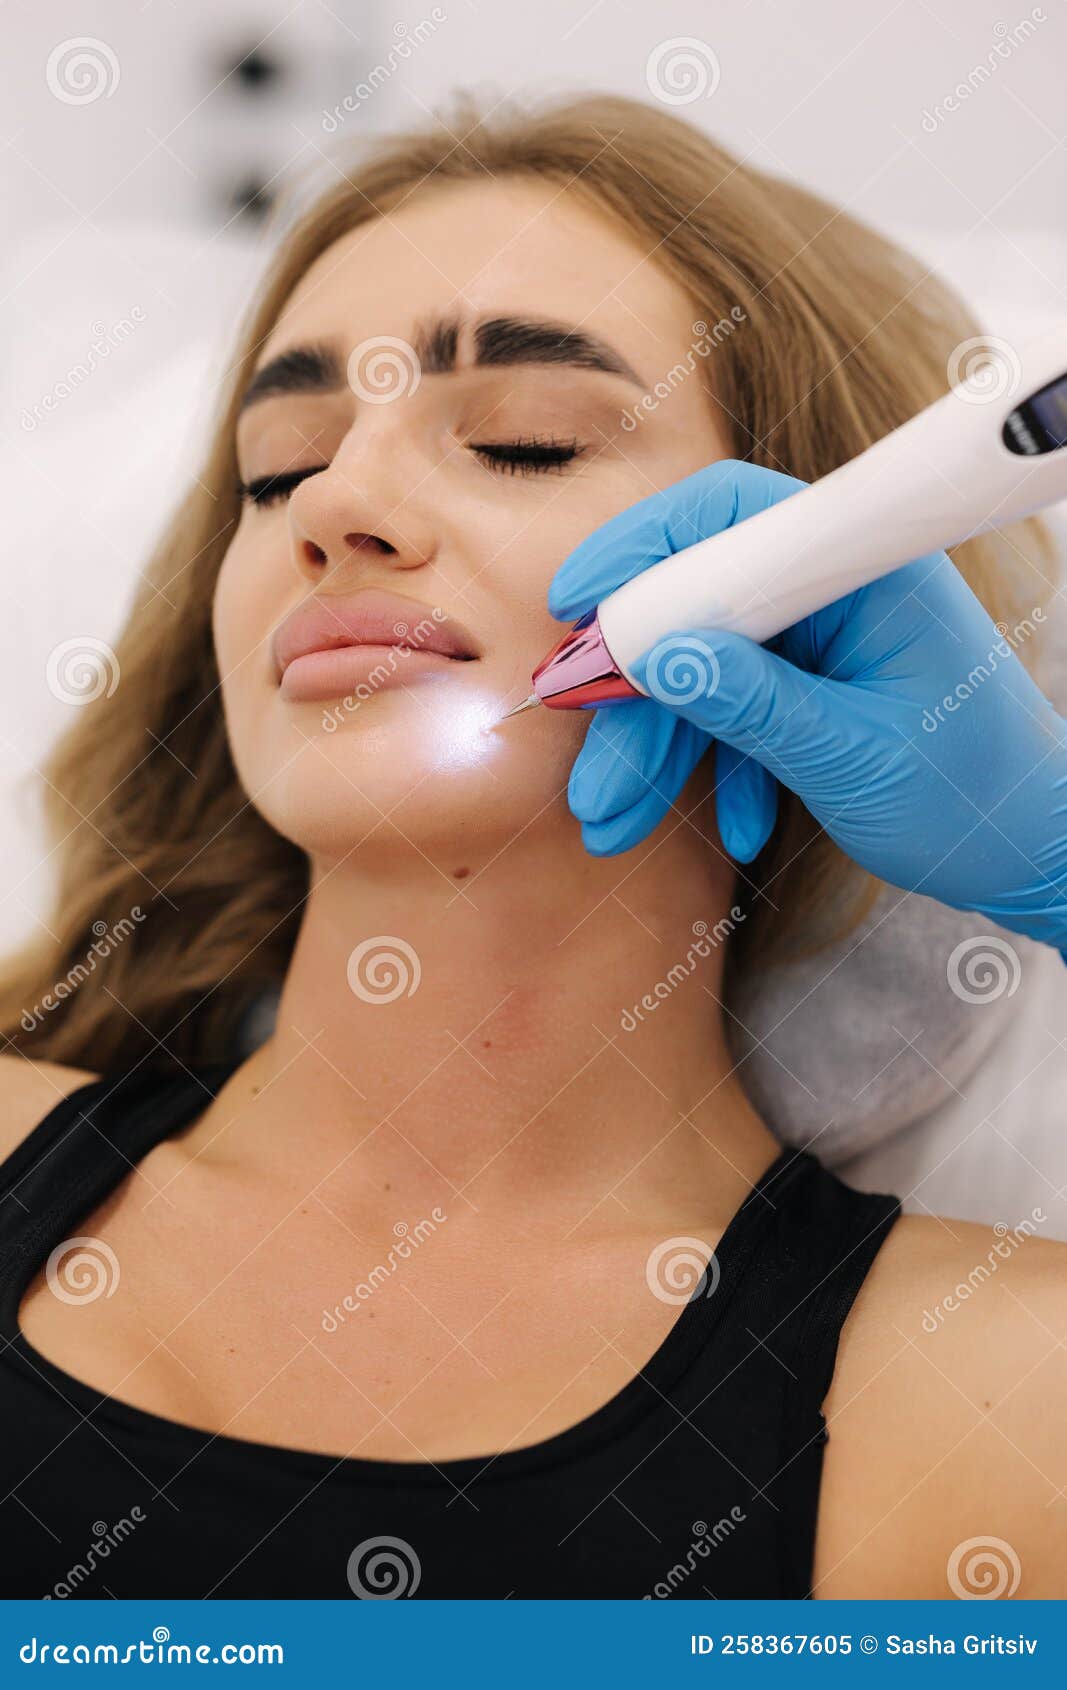 macro close up detail of laser plasma pen removing facial wart on young woman. noninvasive cosmetic treatment